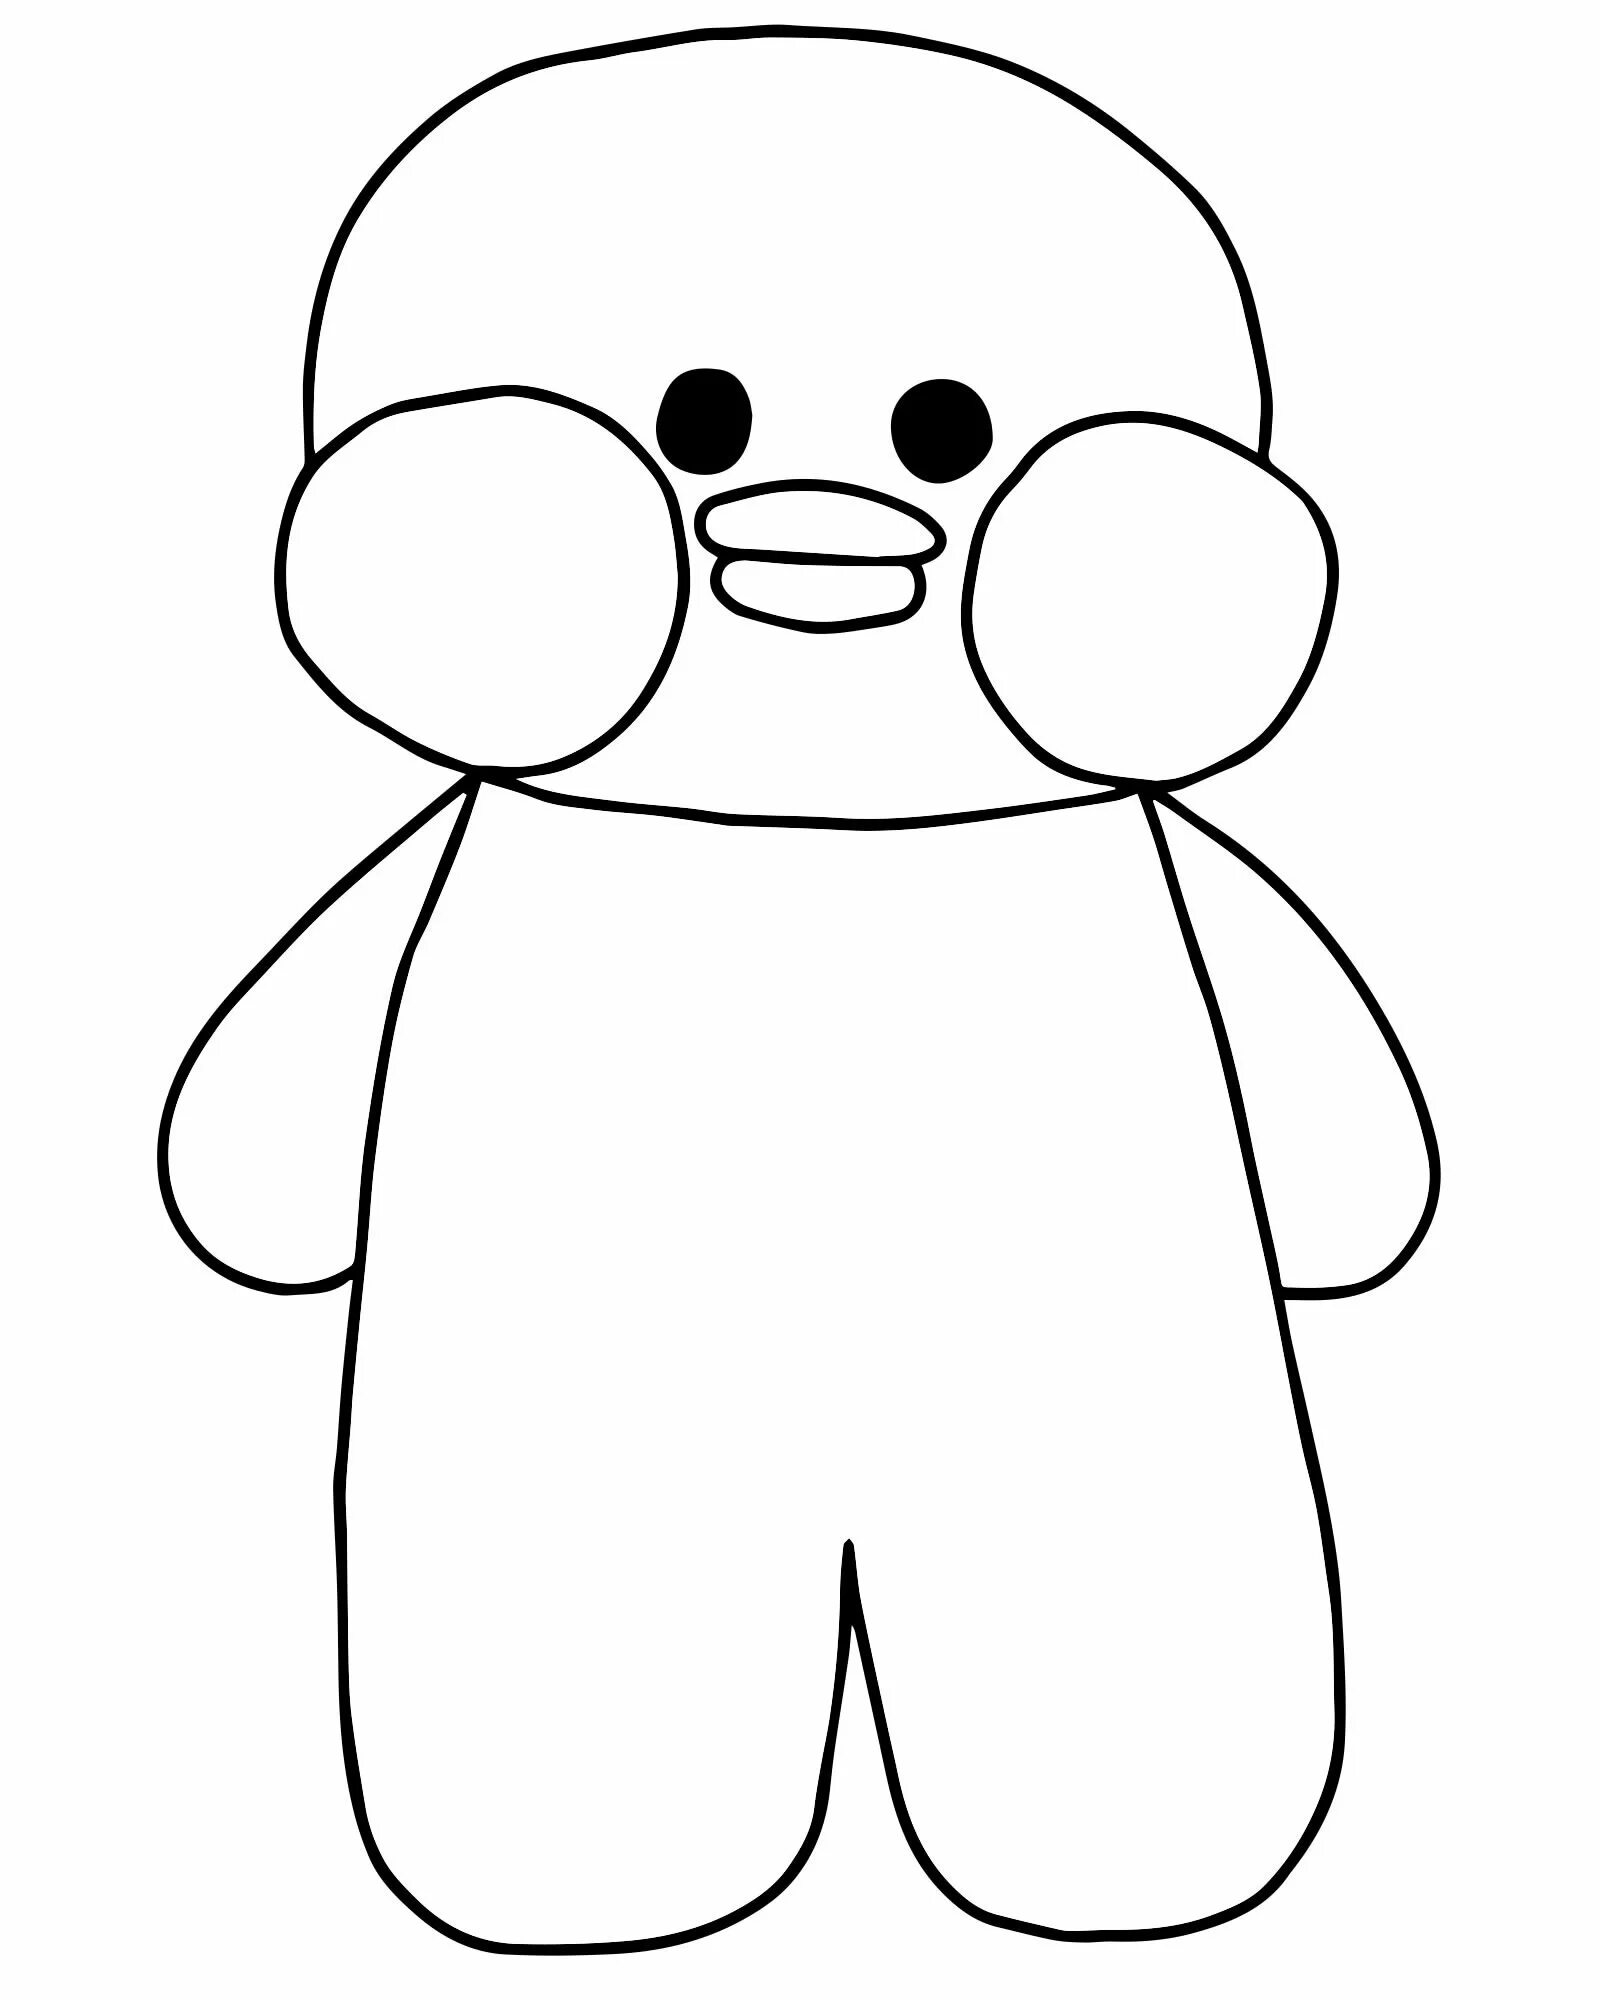 Cool lalafanfan big duck coloring page